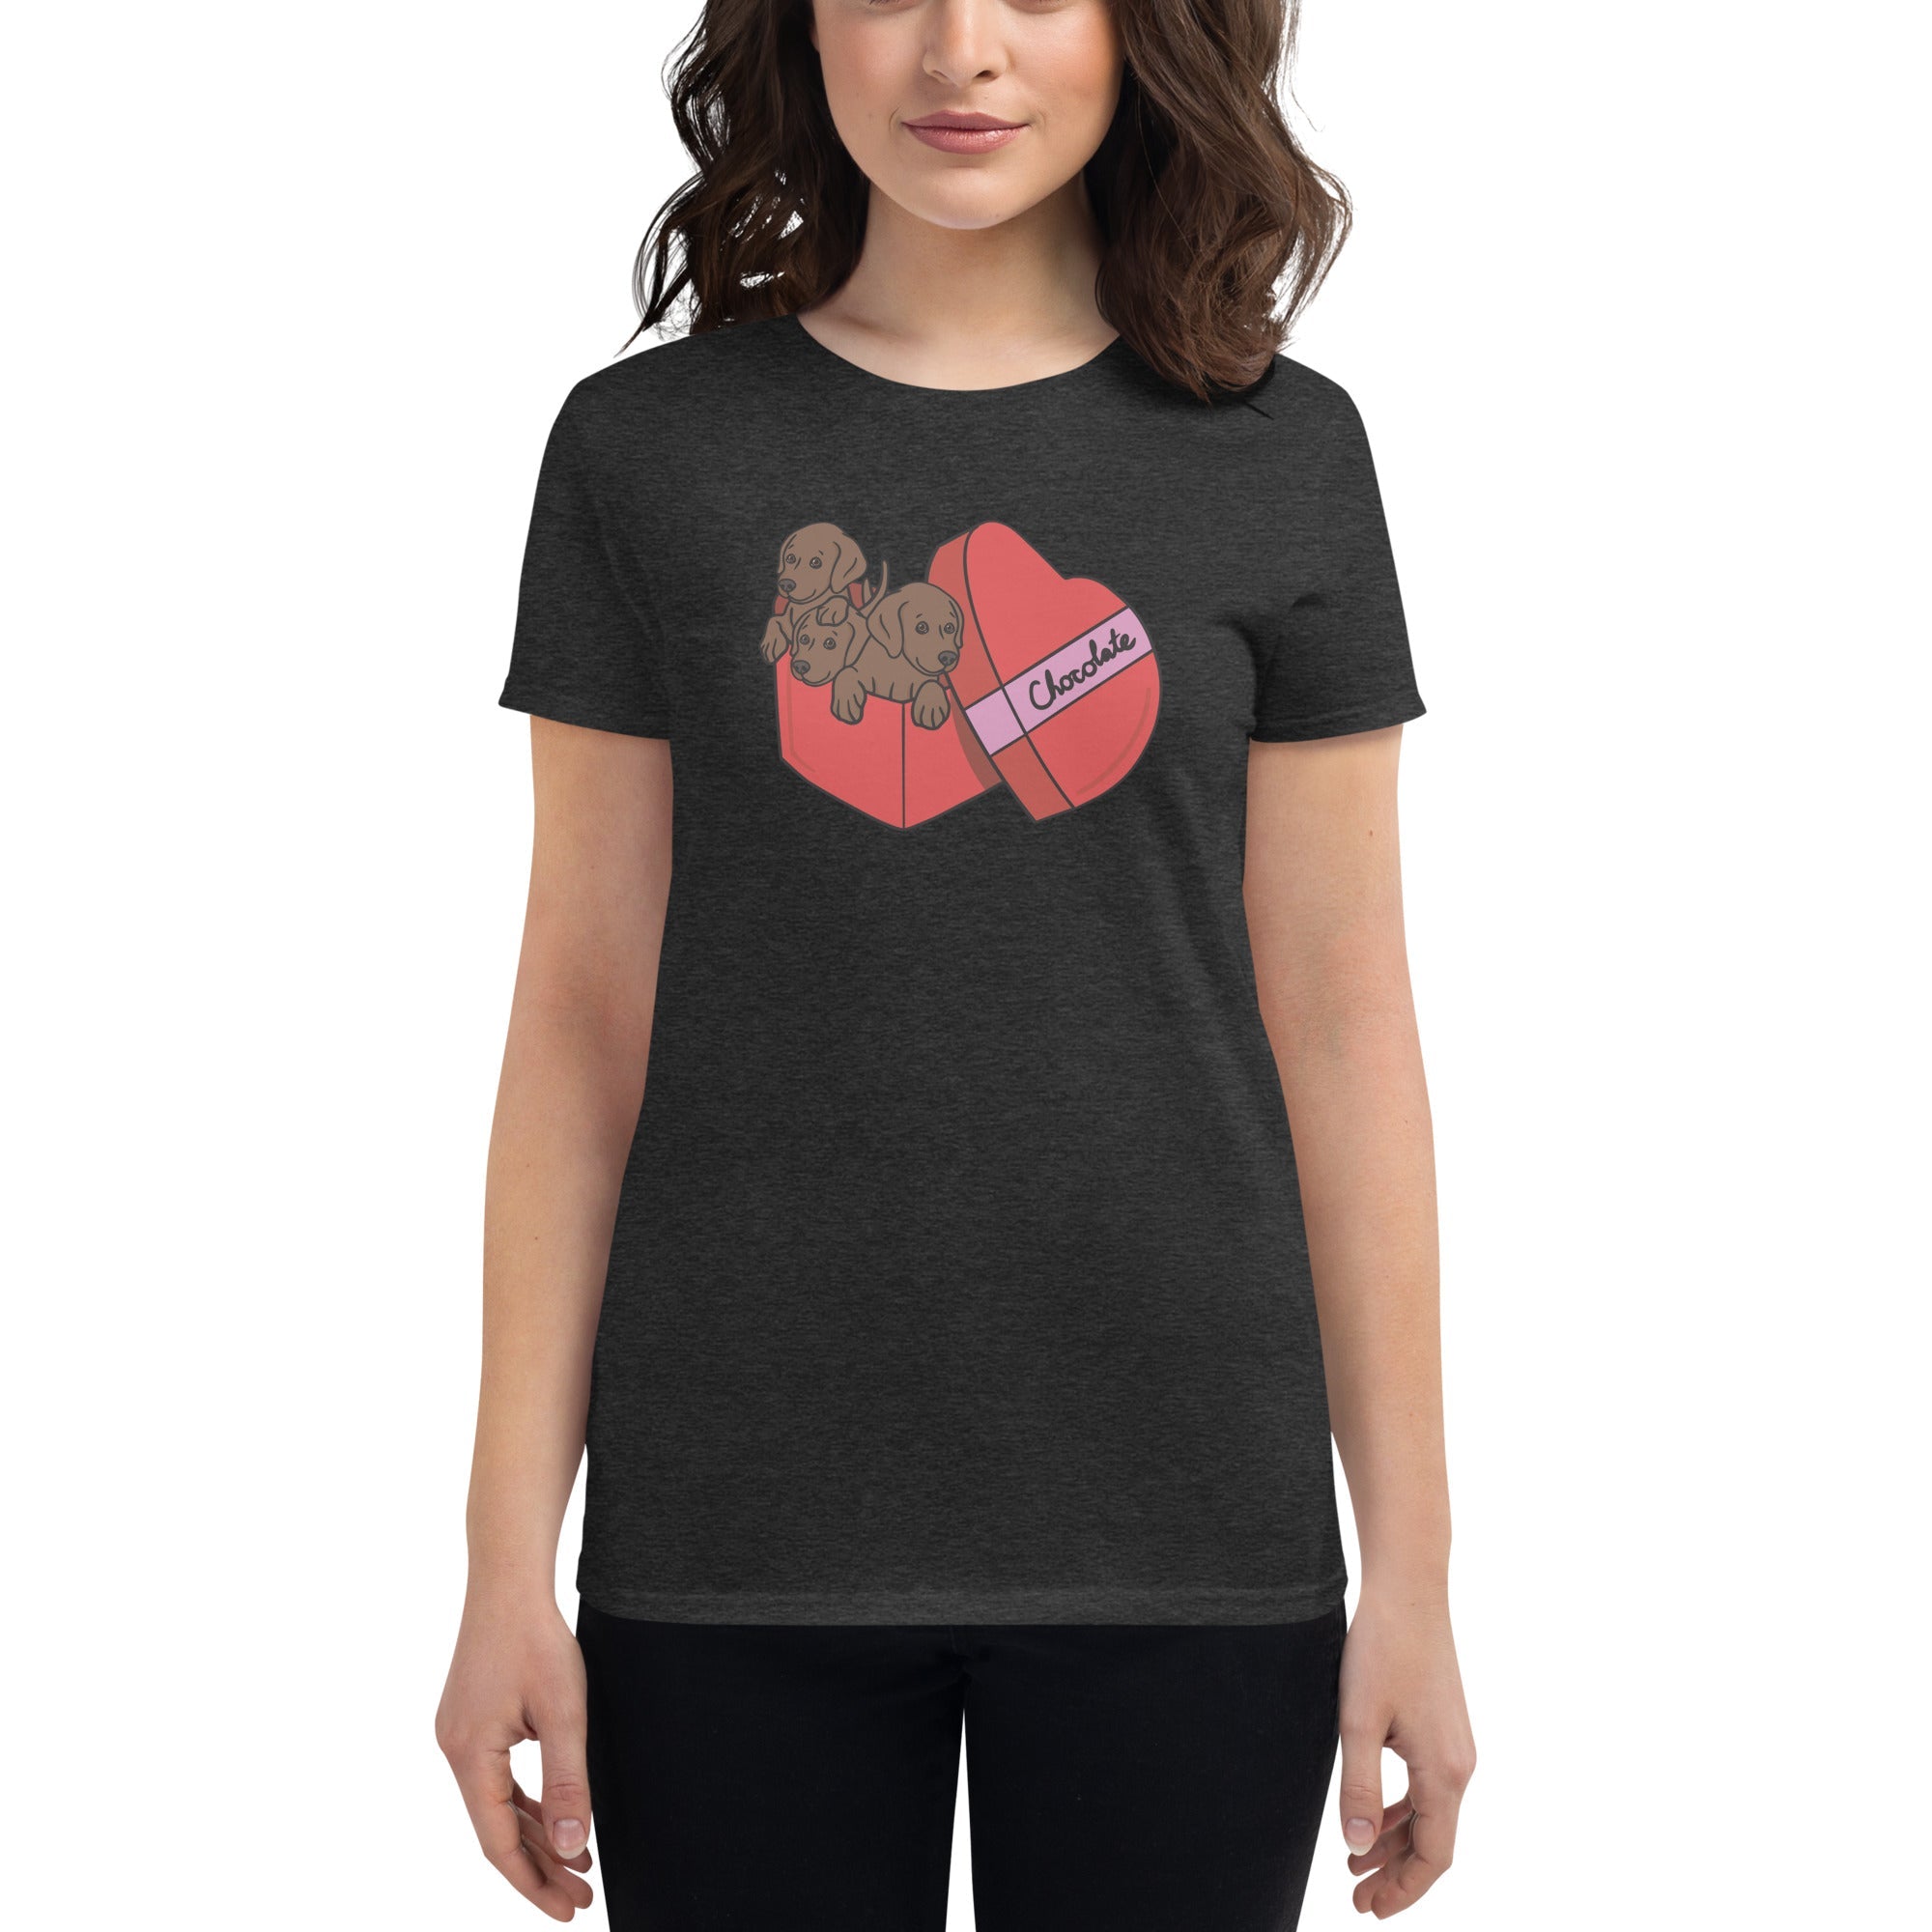 Box of Chocolates Women's Fit T-Shirt - TAILWAGS UNLIMITED